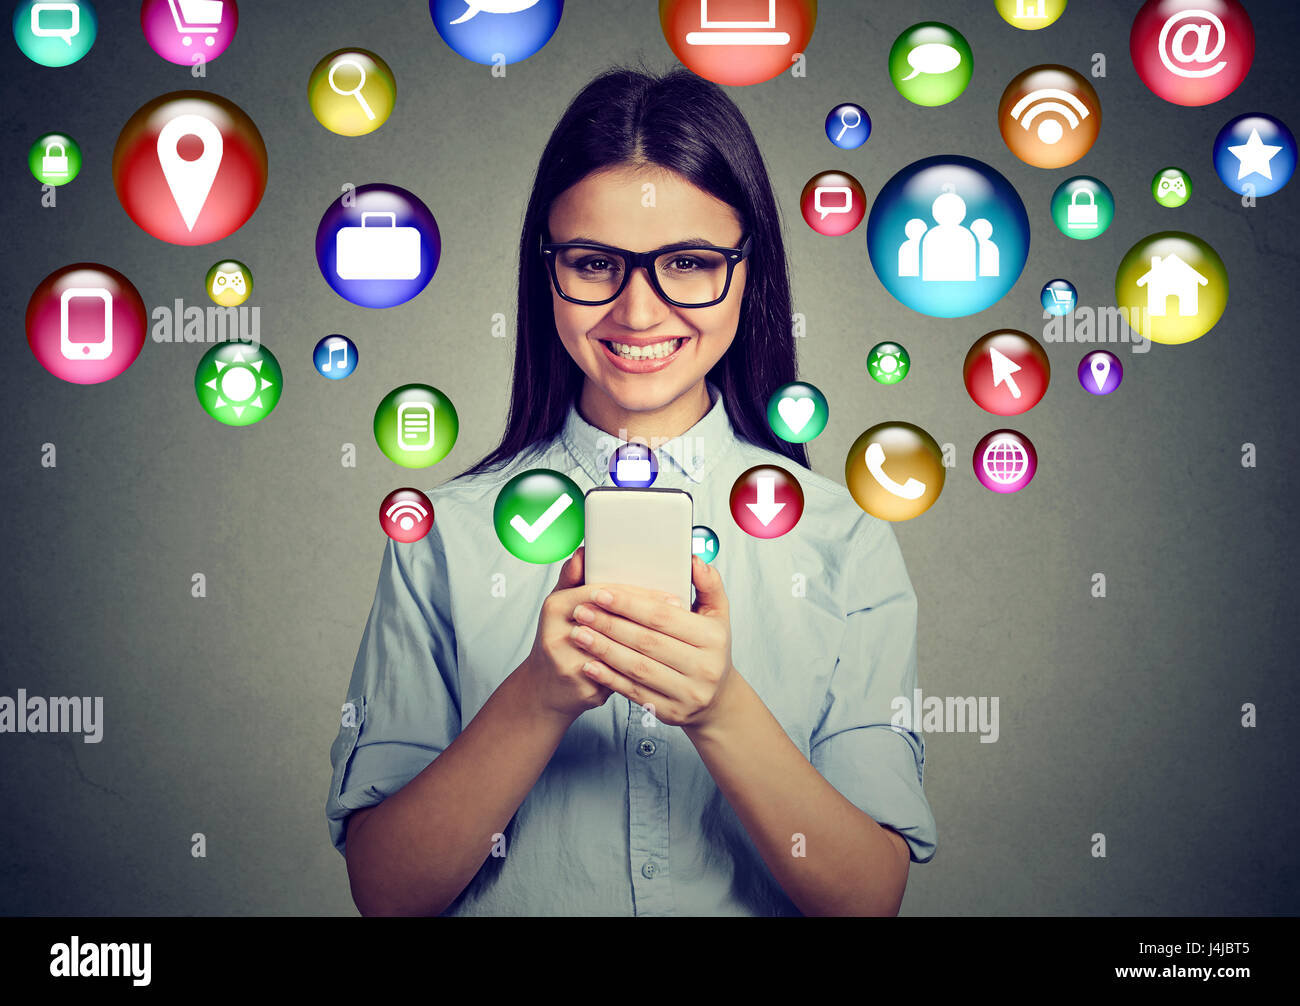 Mobile communication technology concept. Happy young woman in glasses using texting on smartphone with application symbols icons flying out of screen Stock Photo